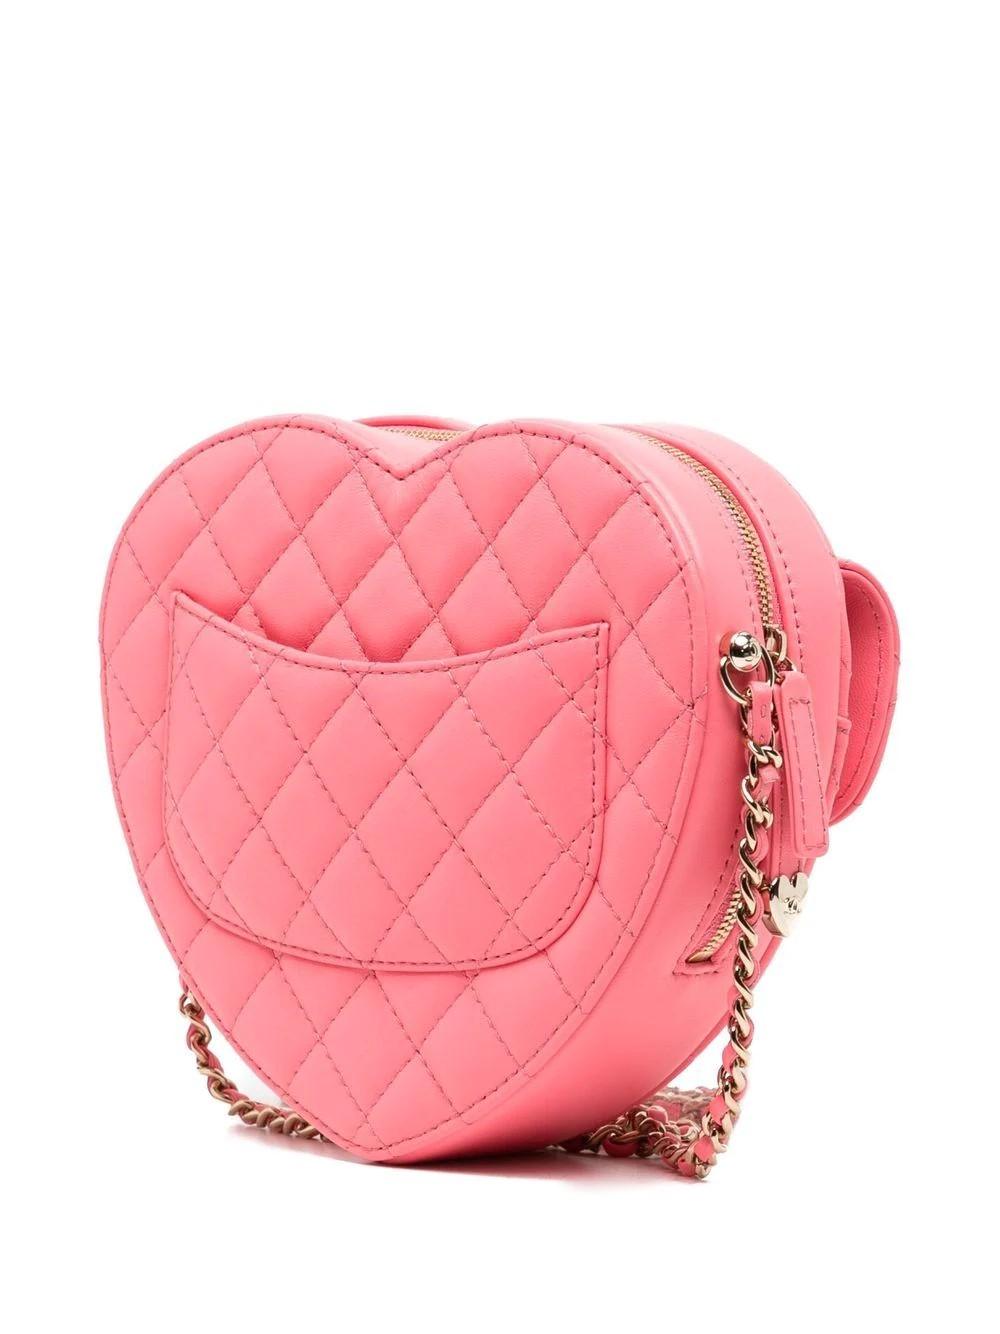 This luxurious Pink Heart Bag from the Chanel SS22 collection offers a fun and unique design with beautiful leather craftsmanship. Featuring soft & supple diamond quilting, a chain-link shoulder strap, a two-way zip fastening, and a signature